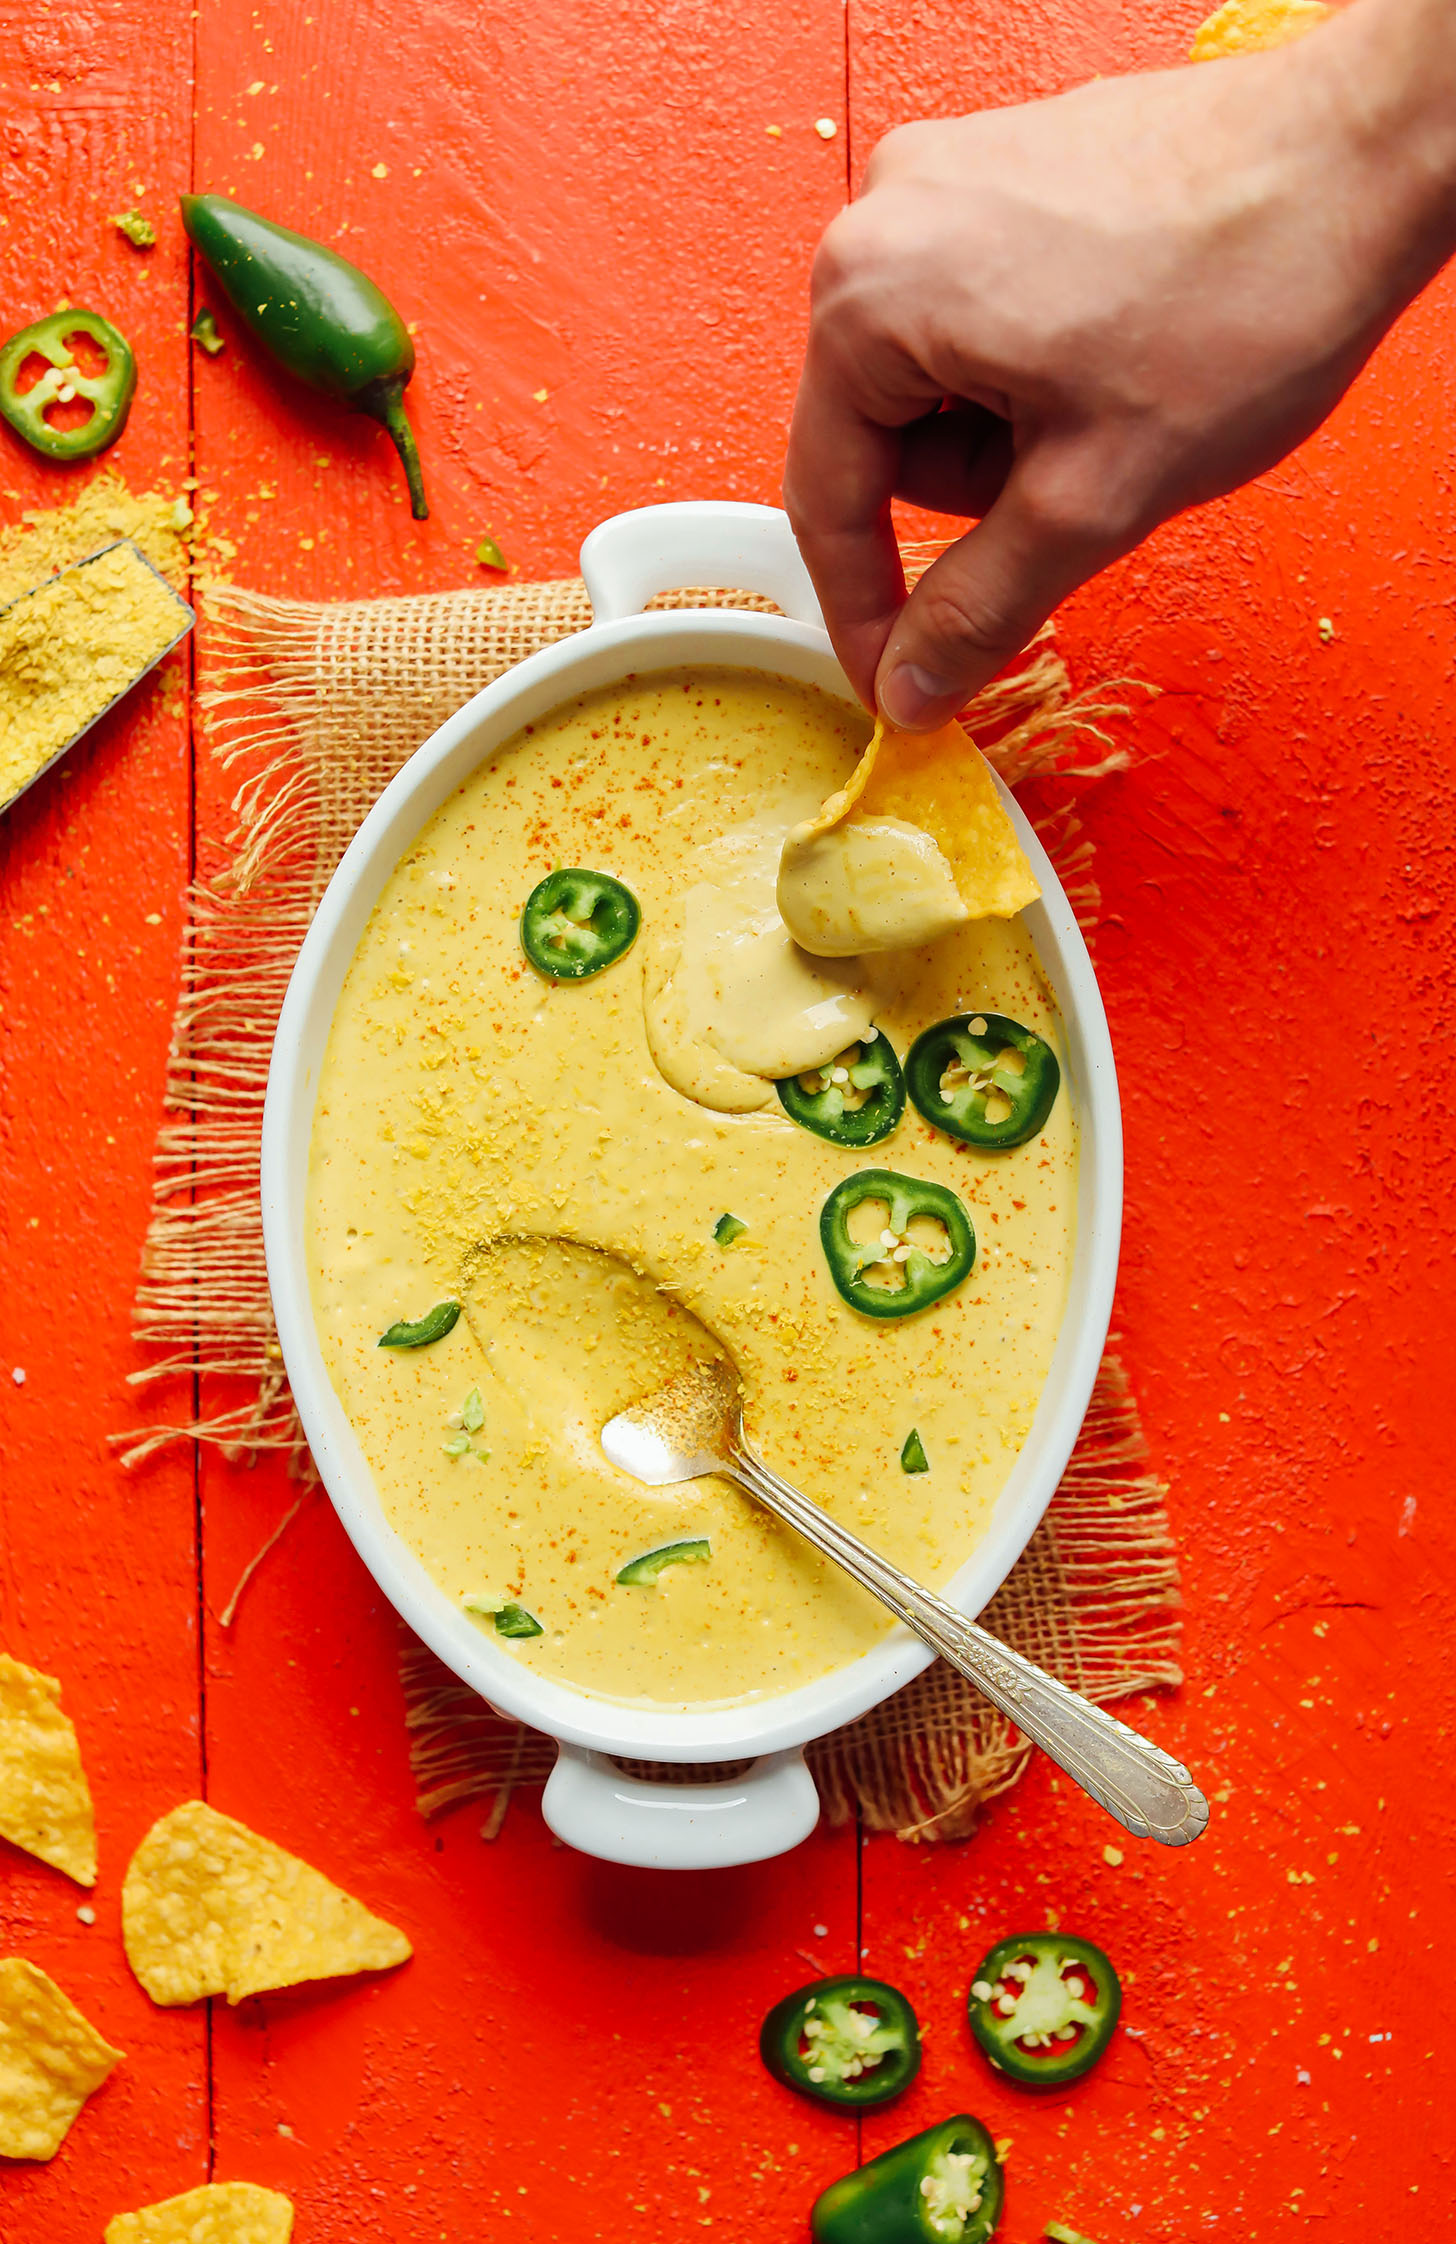 Dipping a tortilla chip into our Roasted Jalapeno Vegan Queso dip